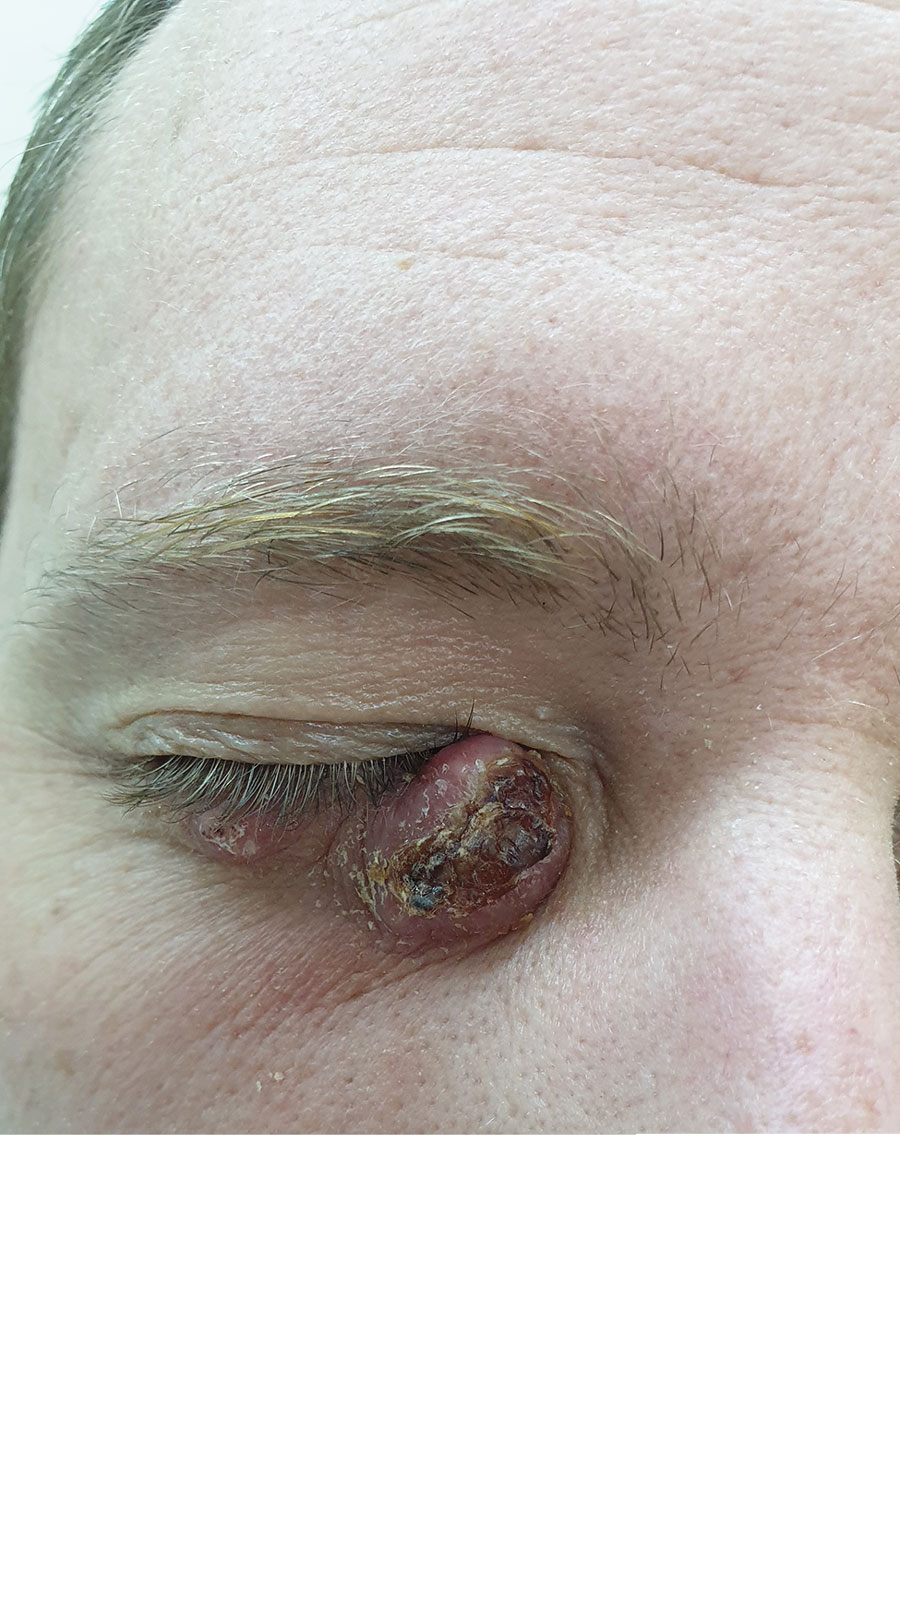 Cutaneous lesion caused by Leishmania infantum on the right lower eyelid of a patient seen at Chaim Sheba Medical Center, Israel, 2021. 